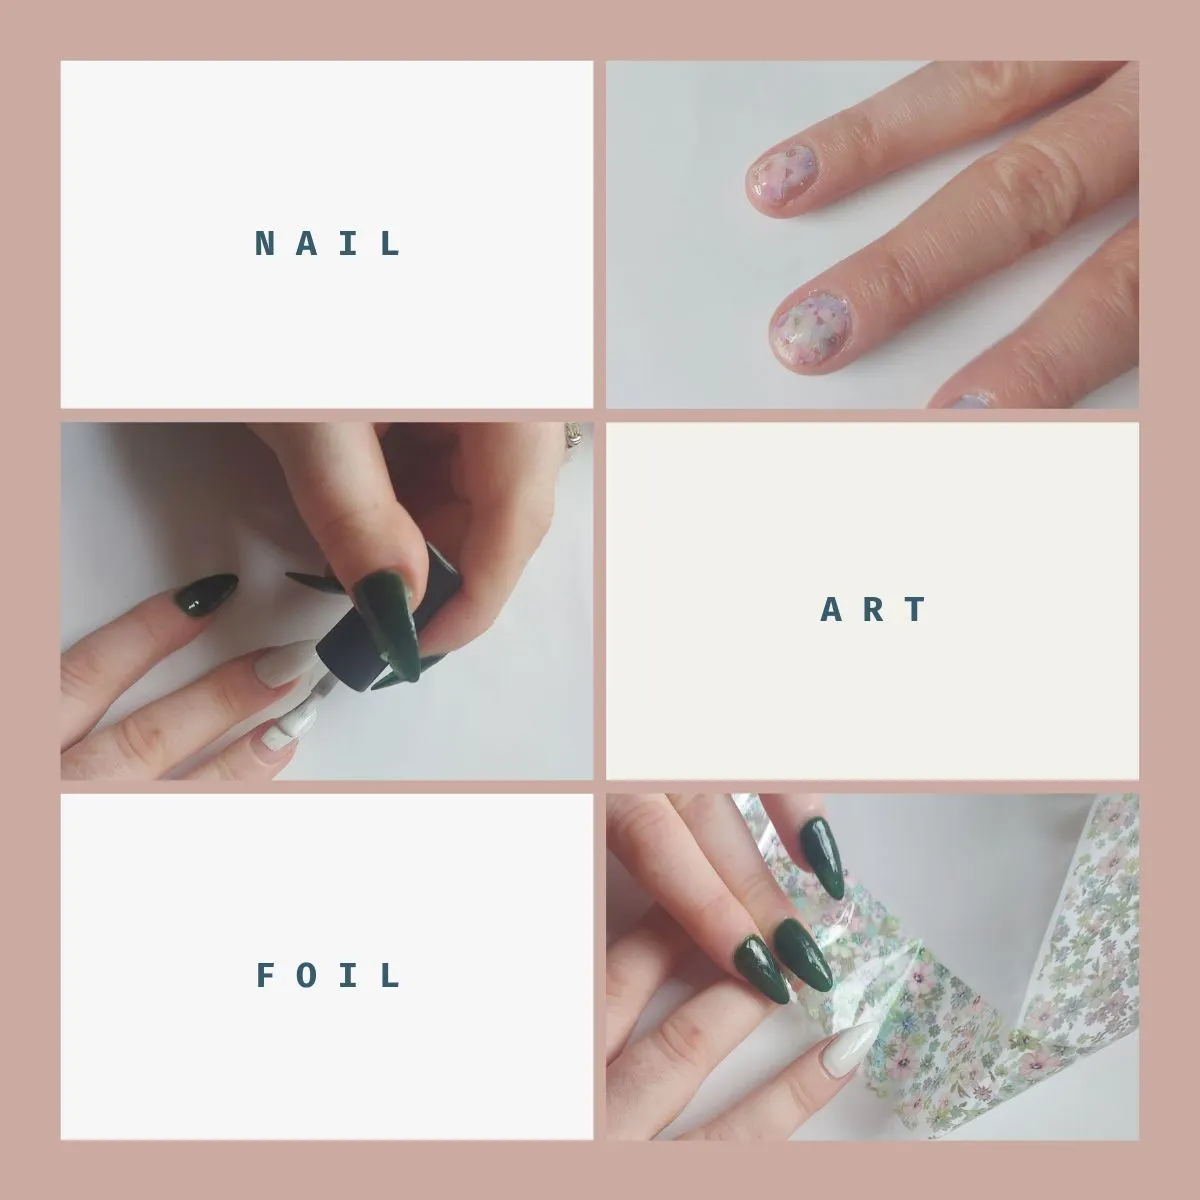 Find out how to use nail art foil